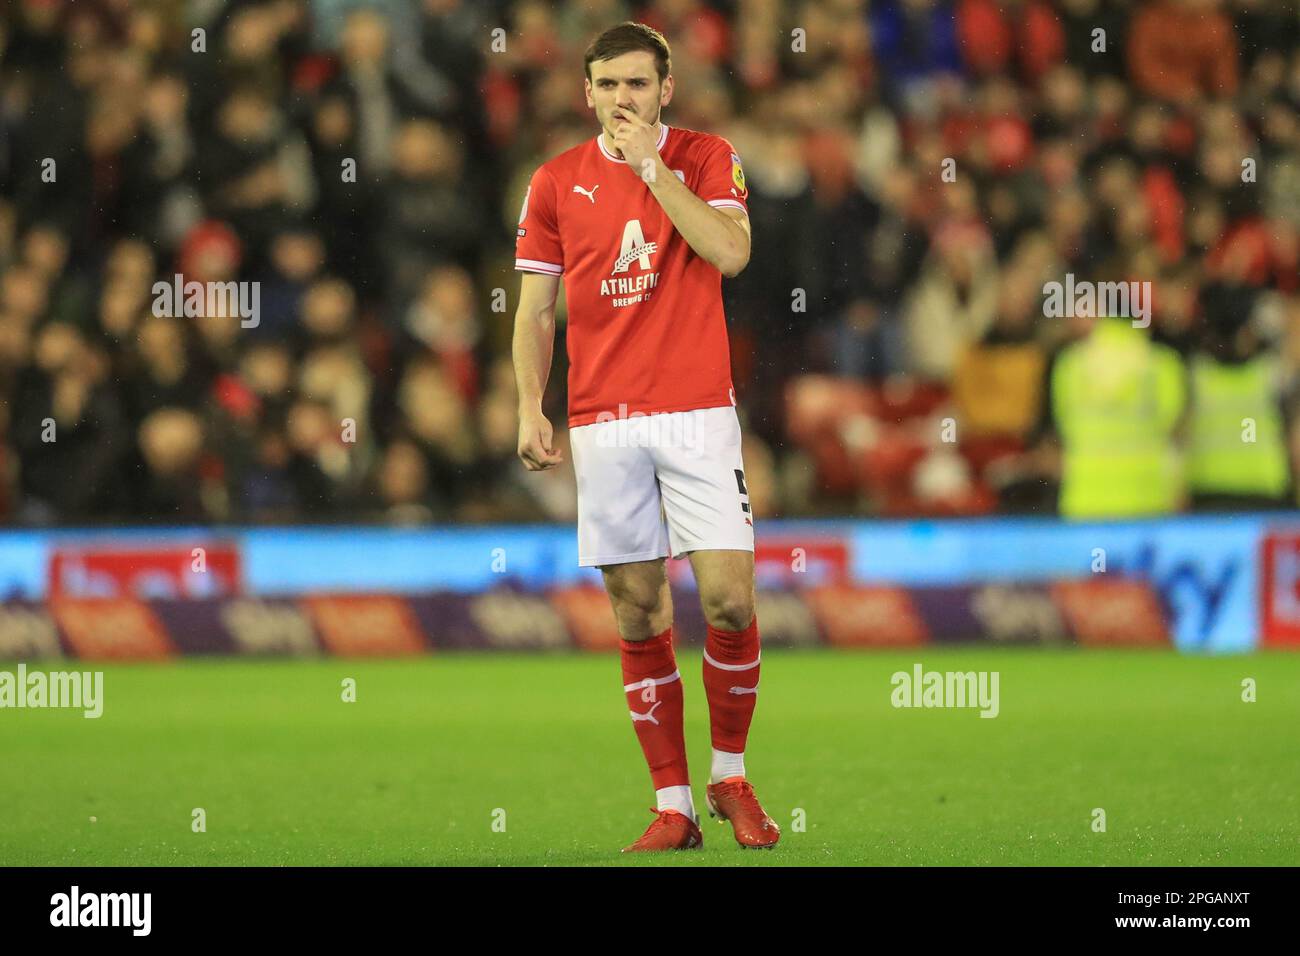 Liam Kitching #5 of Barnsley during the Sky Bet League 1 match Barnsley vs Sheffield Wednesday at Oakwell, Barnsley, United Kingdom, 21st March 2023  (Photo by Alfie Cosgrove/News Images) Stock Photo